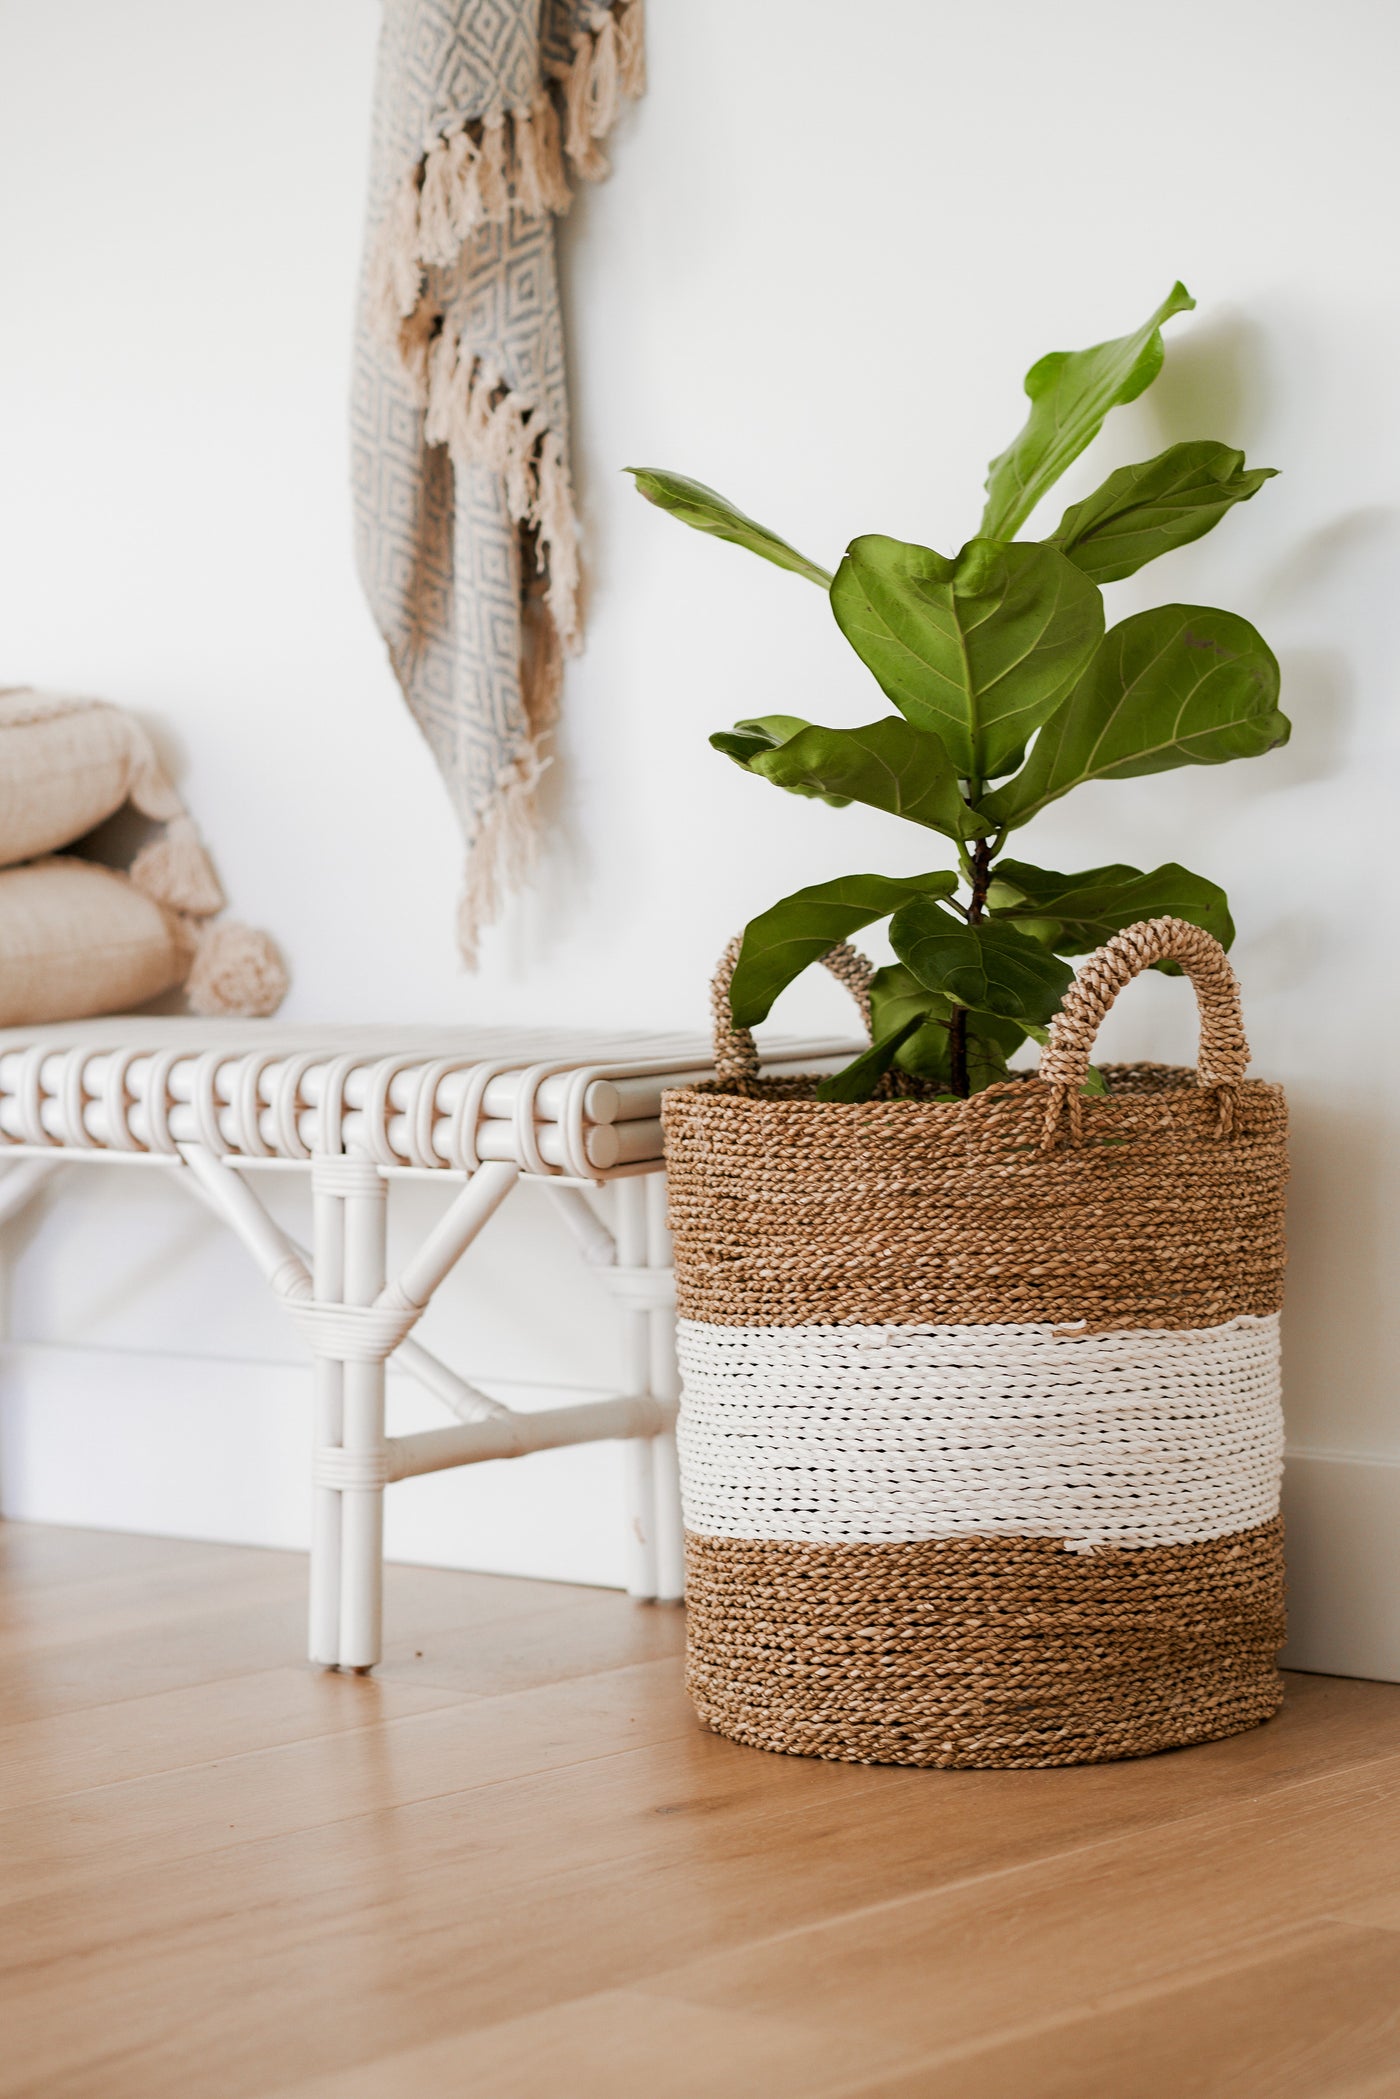 White & Natural Seagrass Baskets